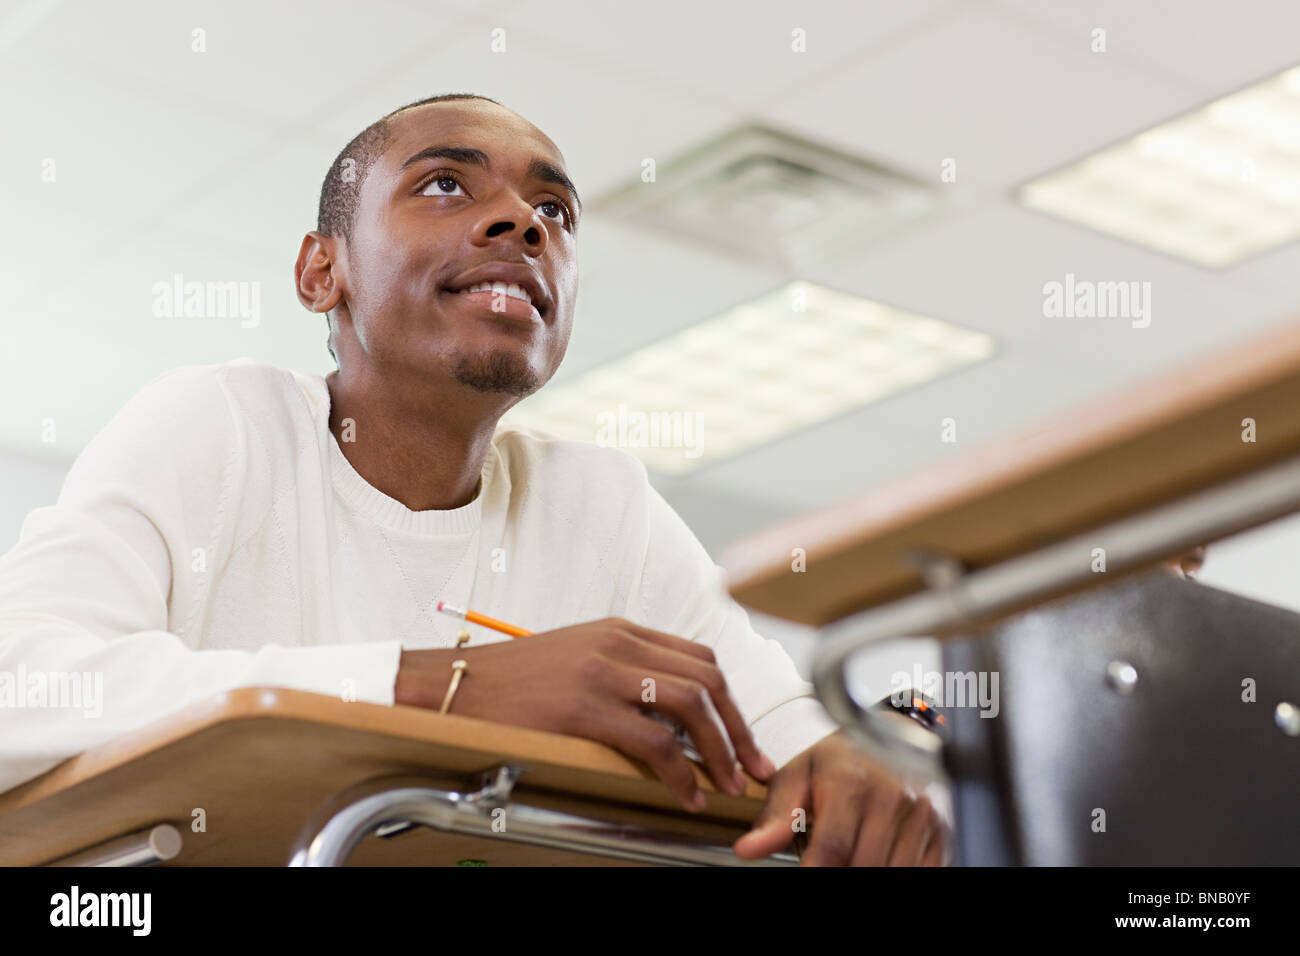 High school student sitting in classroom Banque D'Images